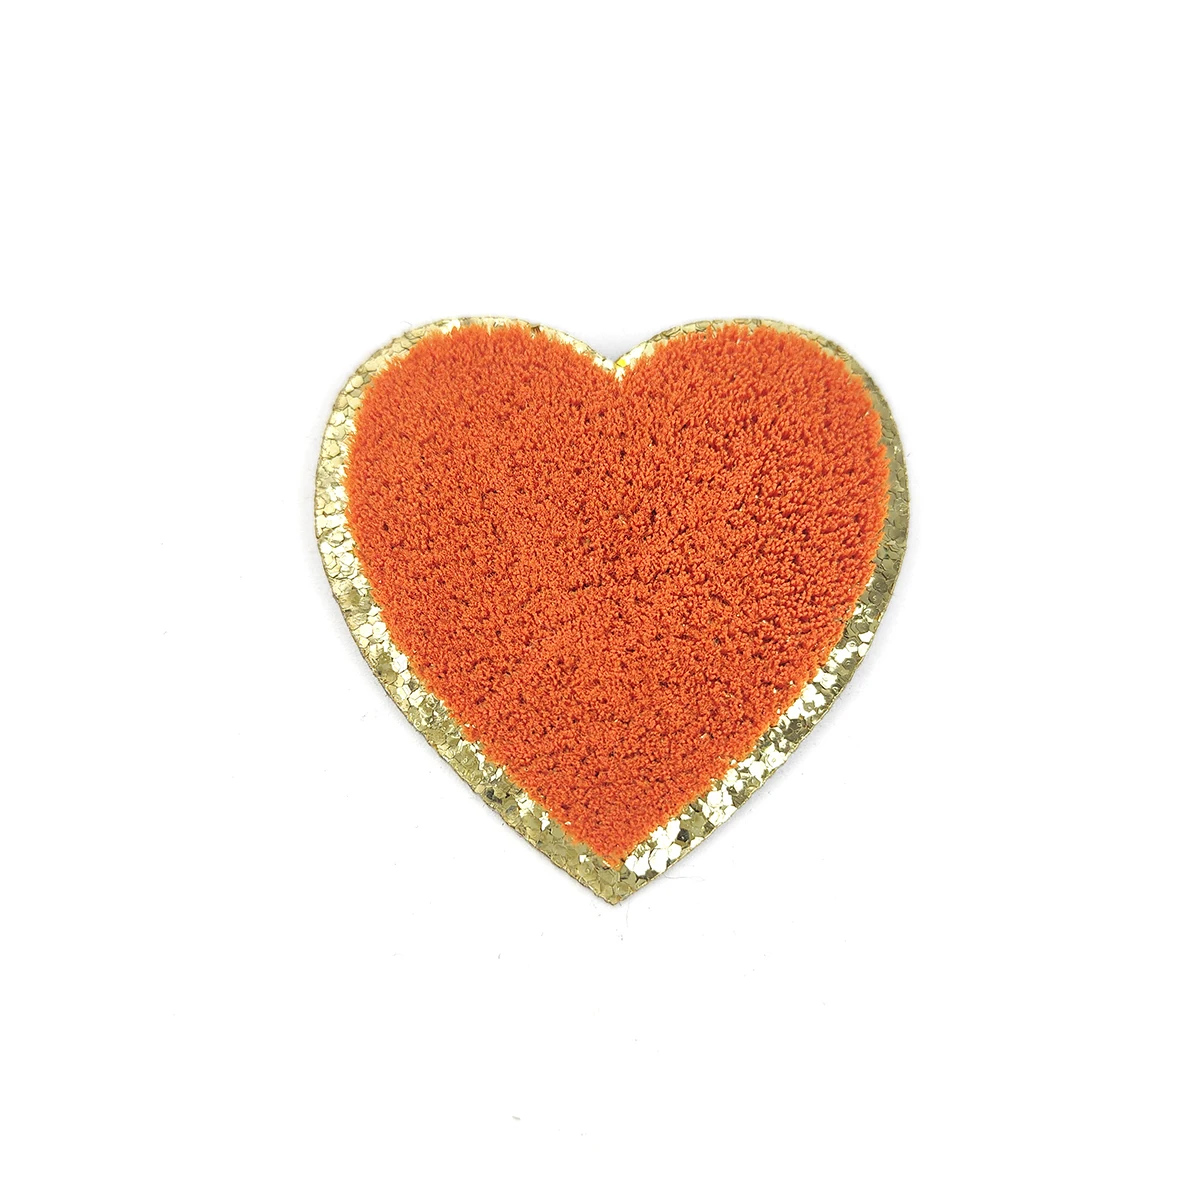 Heart Shaped Iron on Patches Orange Embroidered Sew on Love Applique  Patches 33 Pack